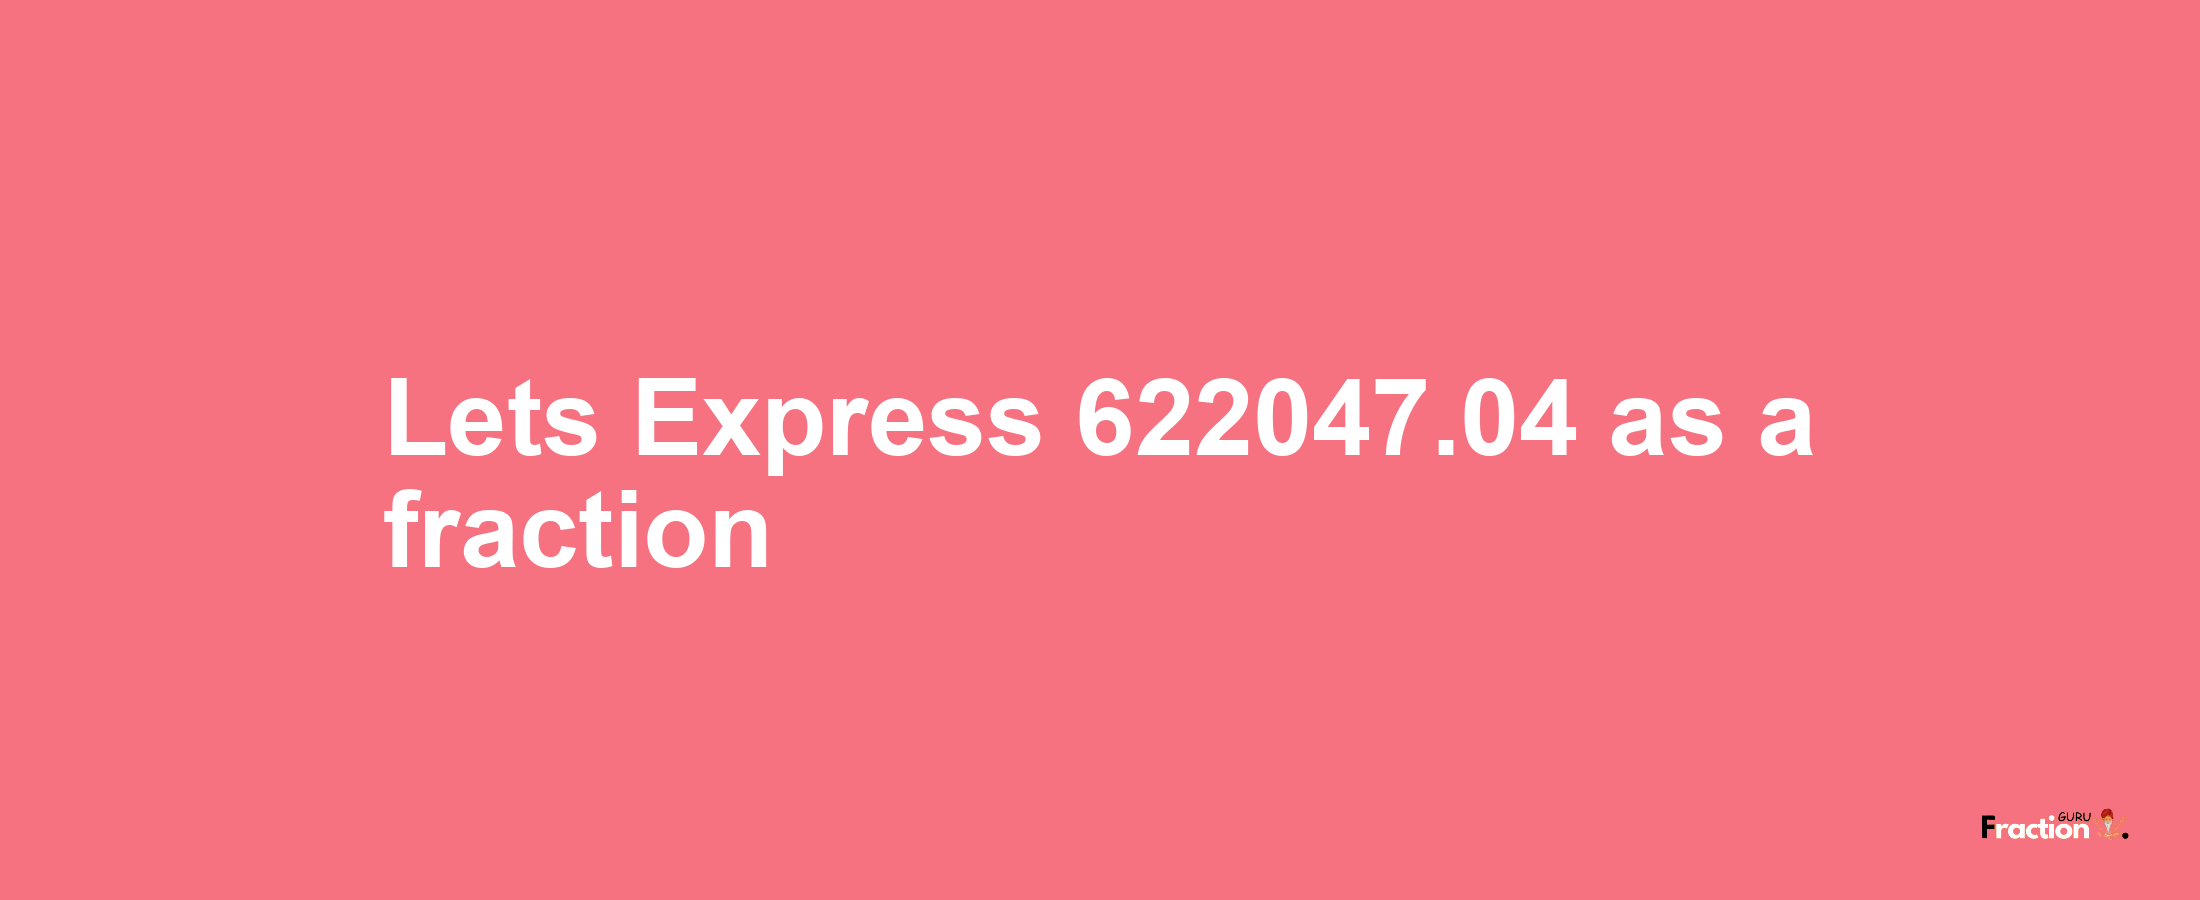 Lets Express 622047.04 as afraction